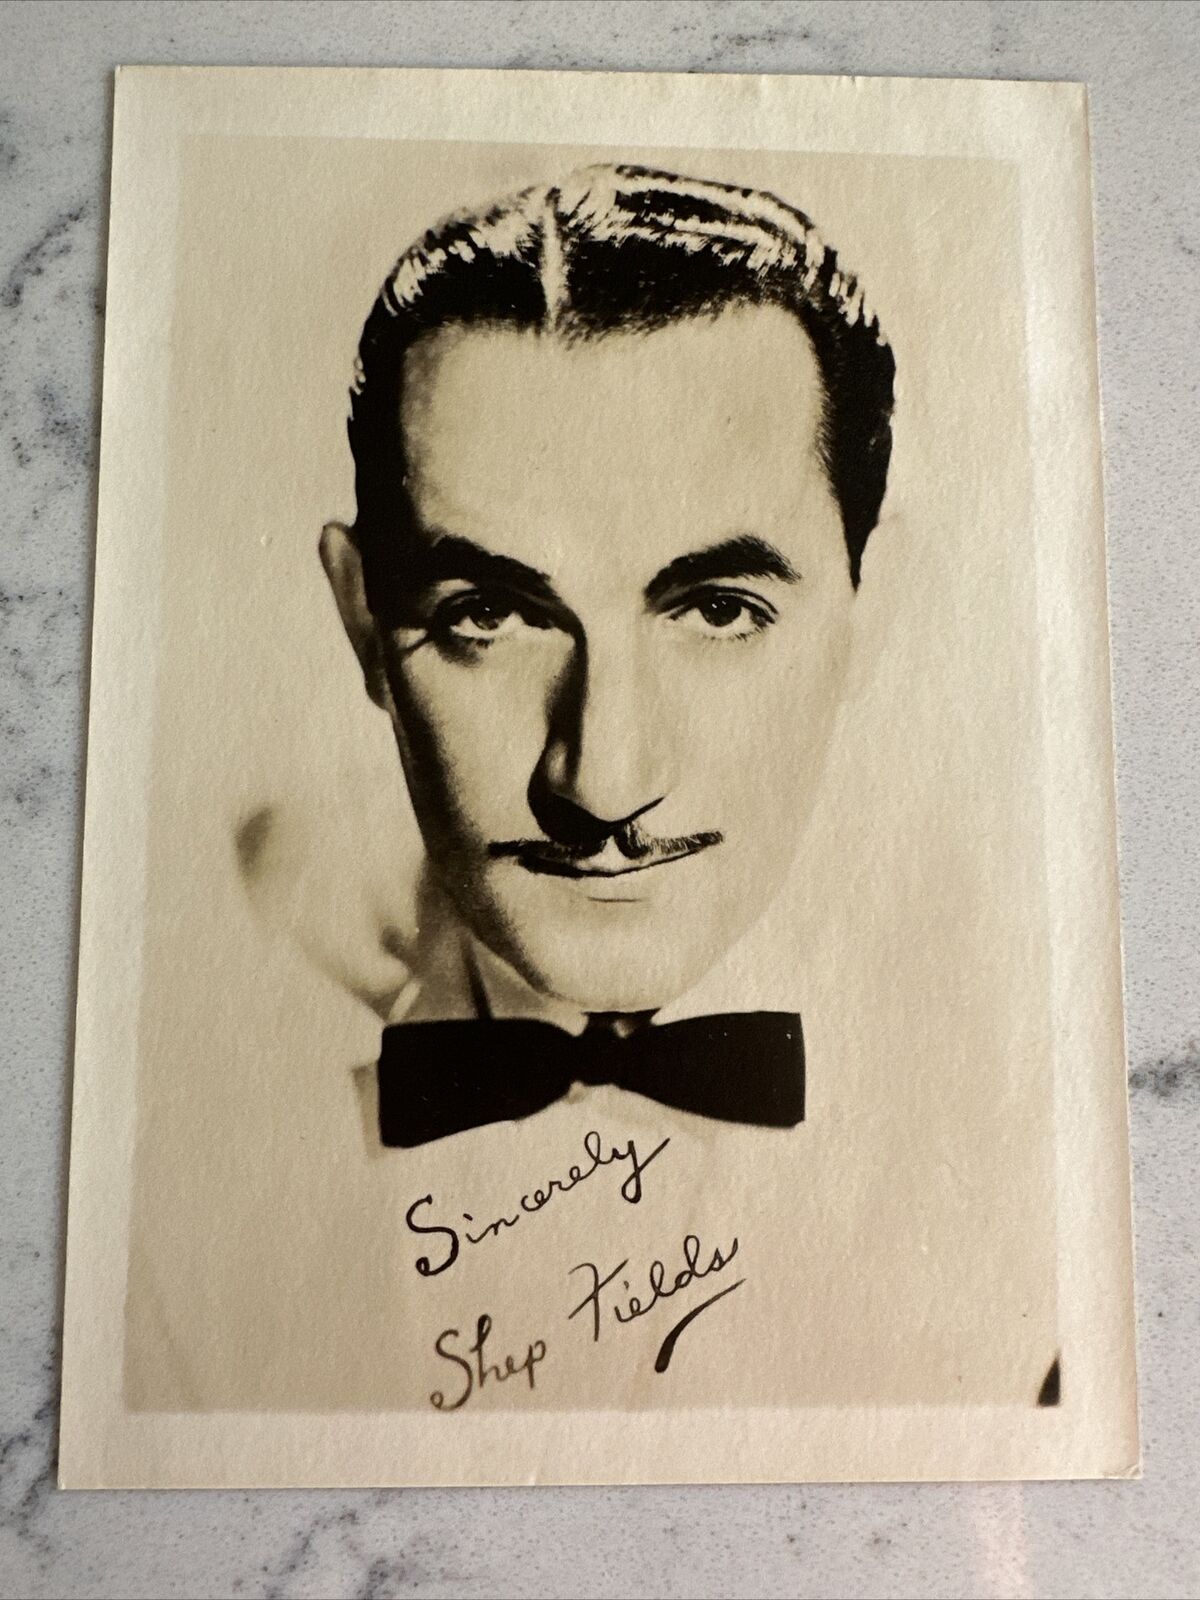 SHEP FIELDS - PHOTOGRAPH - SIGNED  - BIG BAND - ORCHESTRA 5x7”